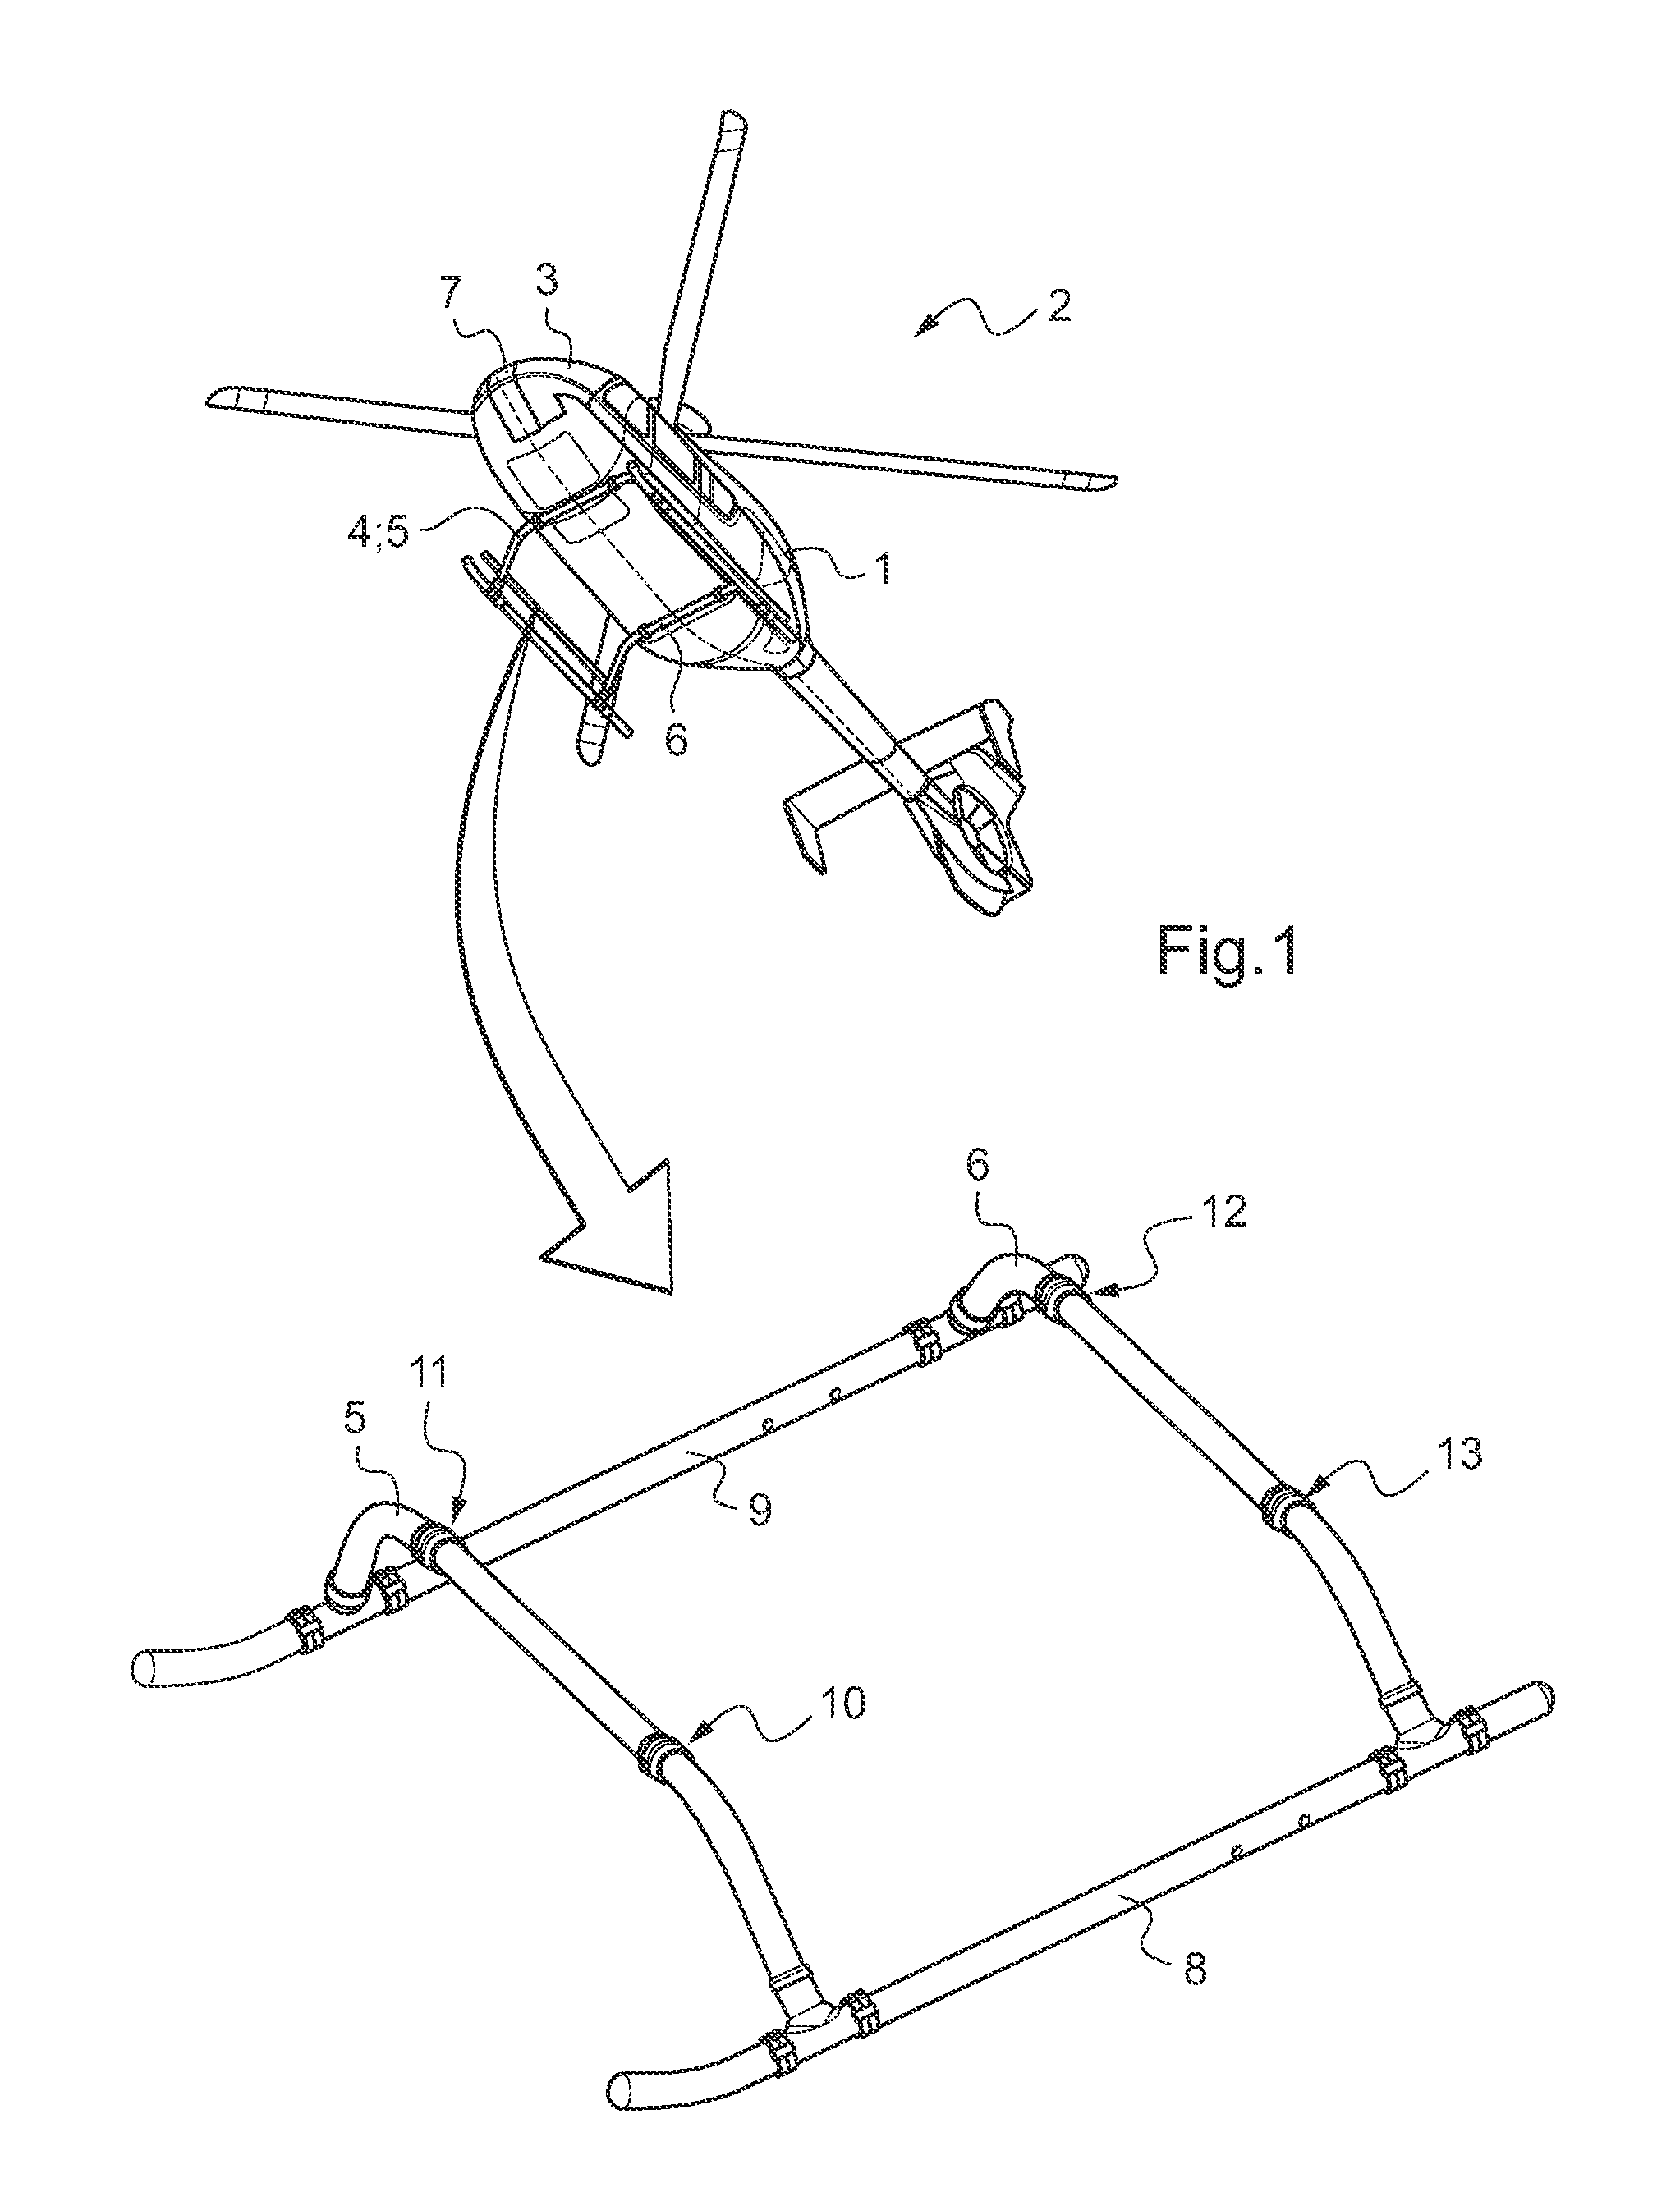 Weighing system and methods of operating such weighing system